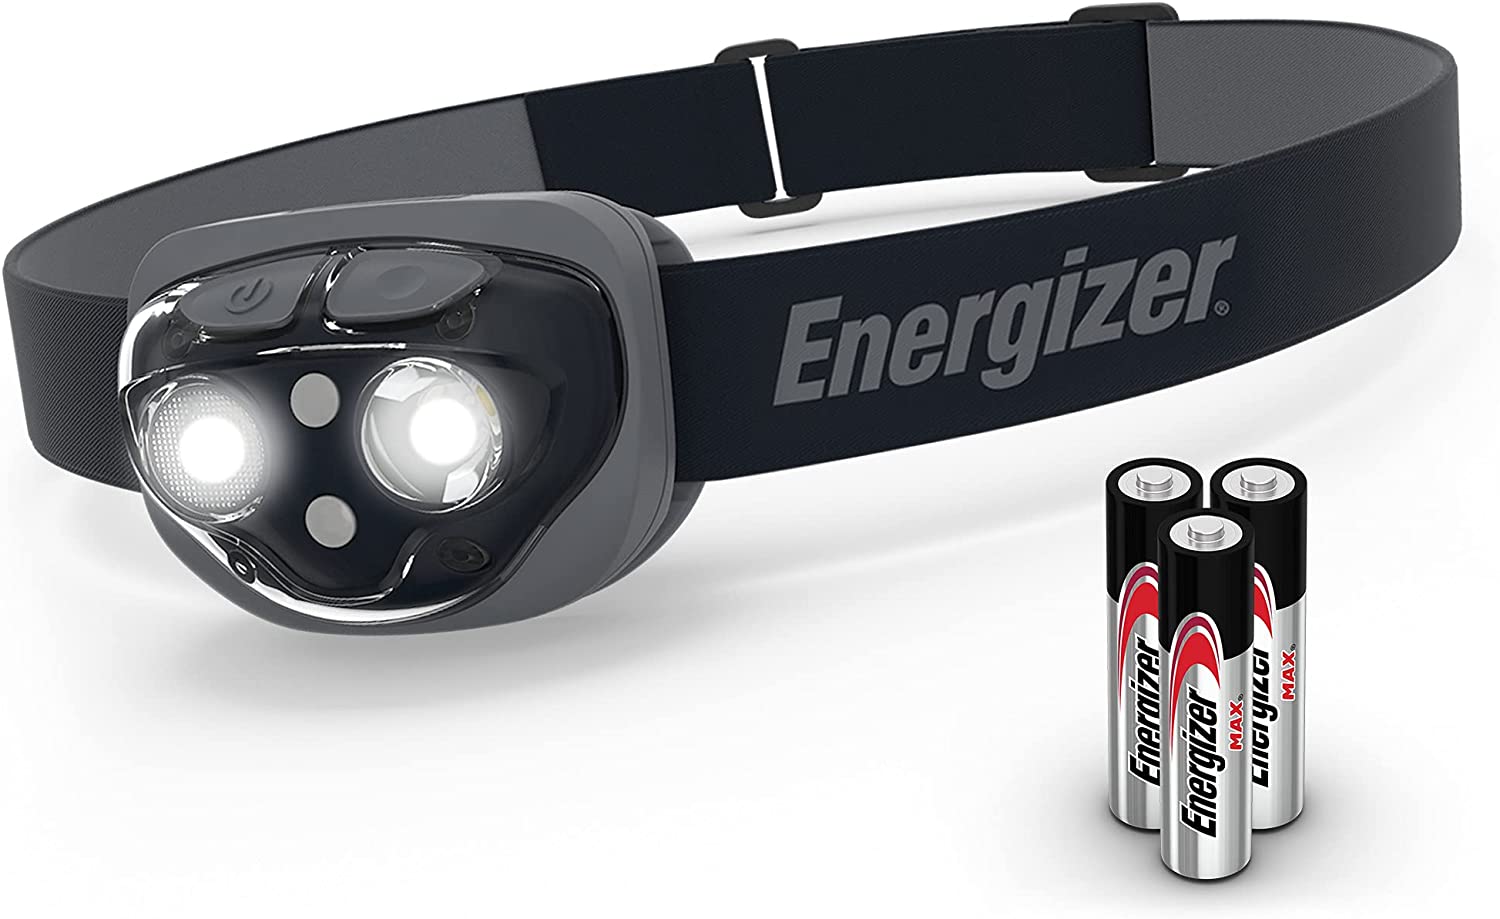 Energizer Pro360 LED Water Resistant Headlamp (Black, batteries included) $8 + Free Shipping w/ Prime or $25+ $7.98